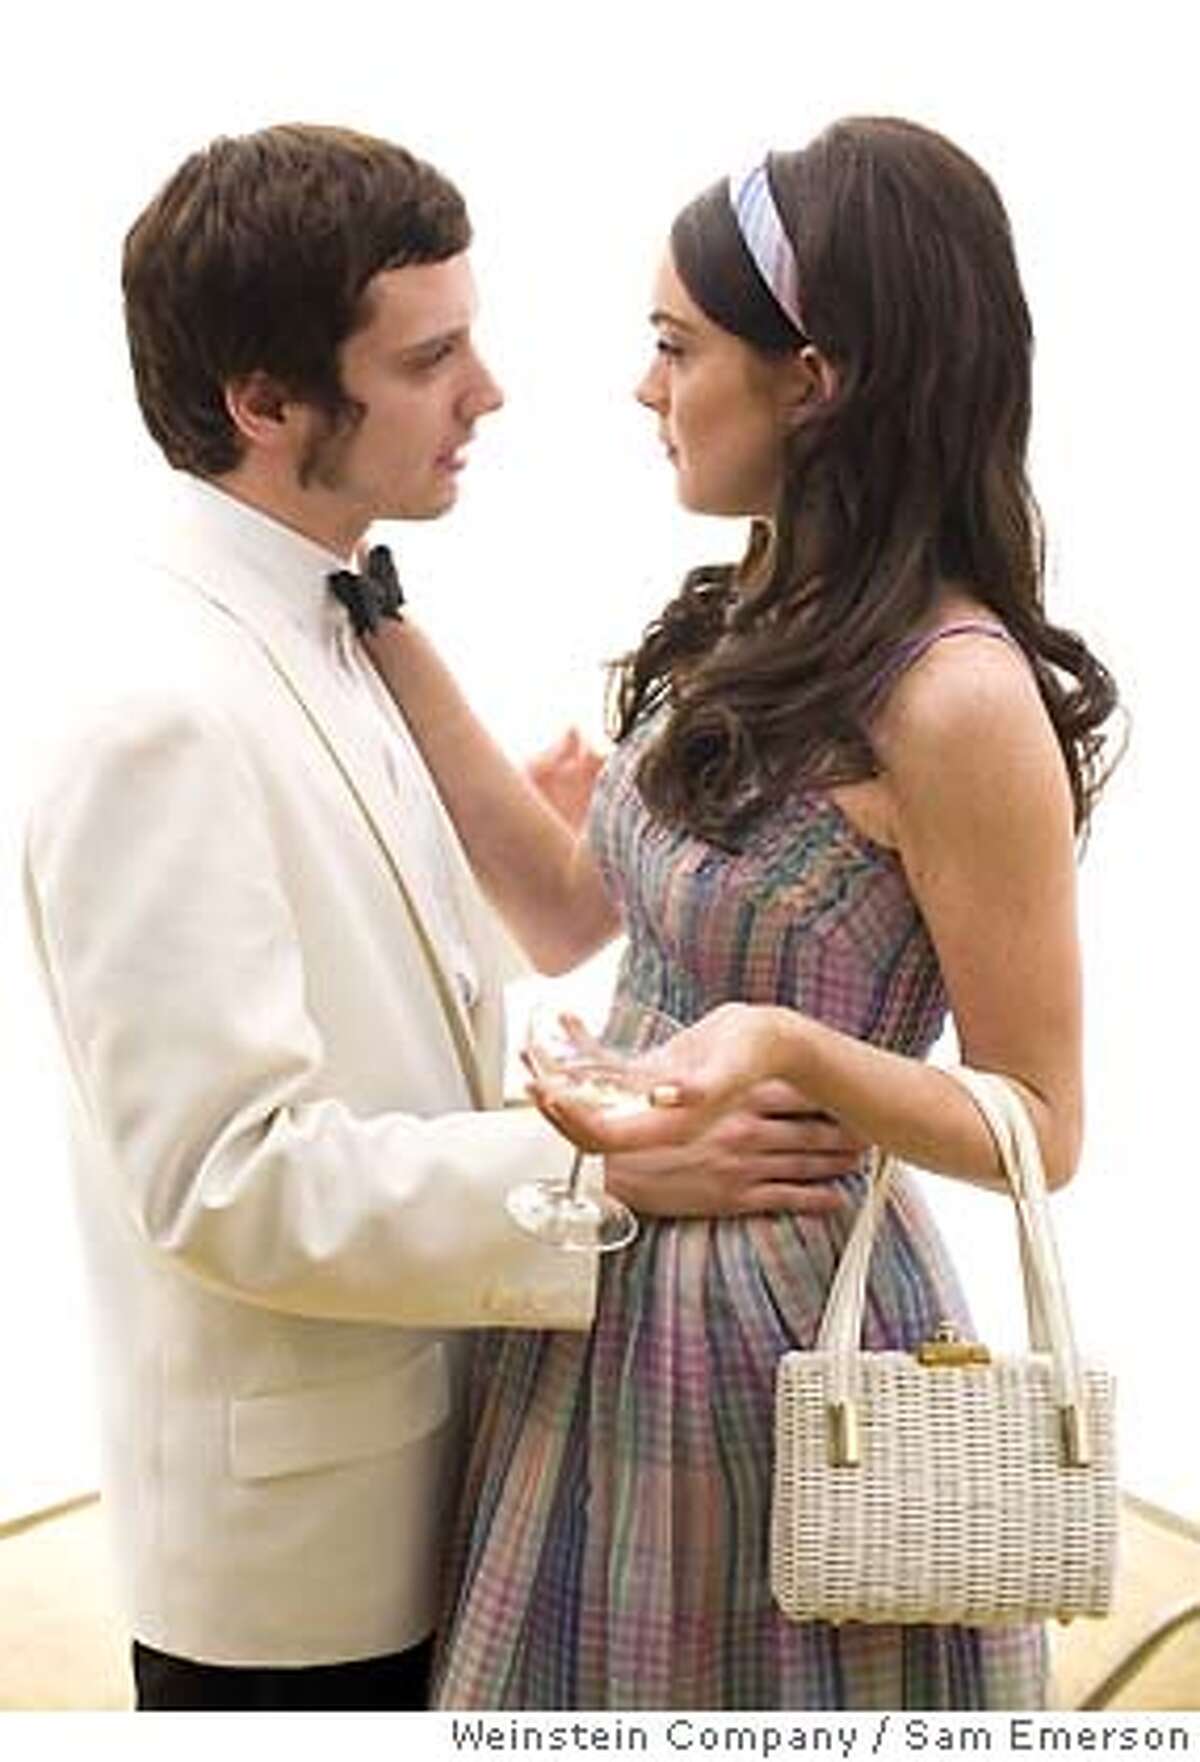 Photo Caption: Elijah Wood and Lindsay Lohan star in Emilio Estevez's BOBBY. Photo by: �The Weinstein Company, 2006/Sam Emerson Ran on: 11-23-2006 Fateful day: Heather Graham, Martin Sheen and Helen Hunt, above, and Elijah Wood and Lindsay Lohan, below, play characters whose stories intersect on June 4, 1968, the day Robert F. Kennedy was assassinated.